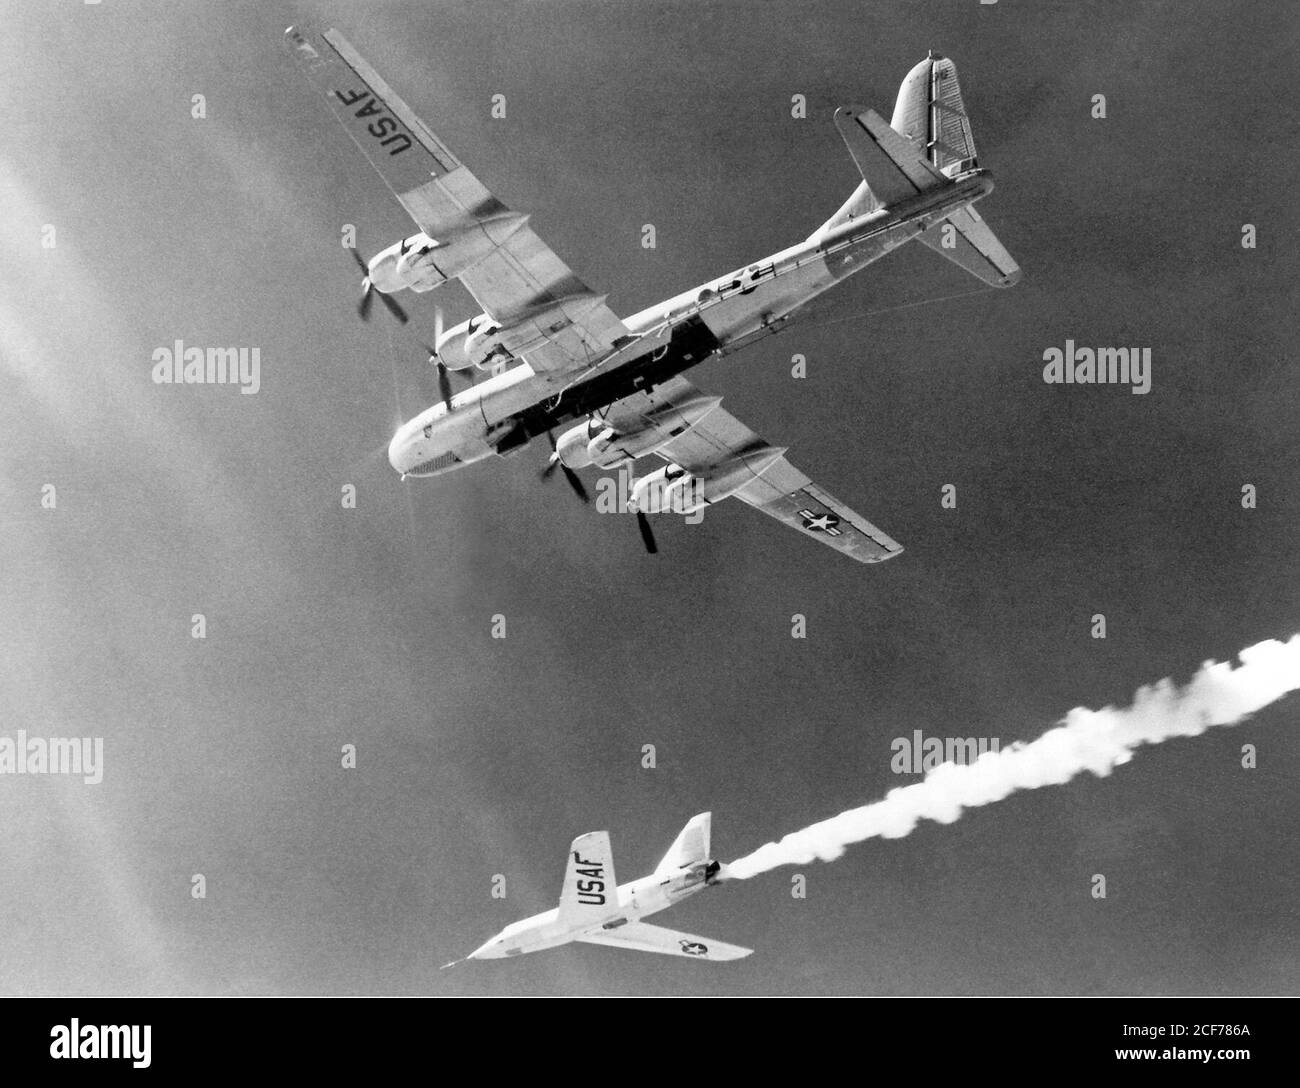 The Bell Aircraft Company X-2 (46-674) drops away from its Boeing B-50 mothership in this photo. Lt. Col. Frank 'Pete' Everest piloted 674 on its first unpowered flight on August 5 1954. He made the first rocket-powered flight on November 18, 1955. Everest made the first supersonic X-2 flight in 674 on April 25, 1956, achieving a speed of Mach 1.40. In July, he reached Mach 2.87, just short of the Mach 3 goal. Stock Photo